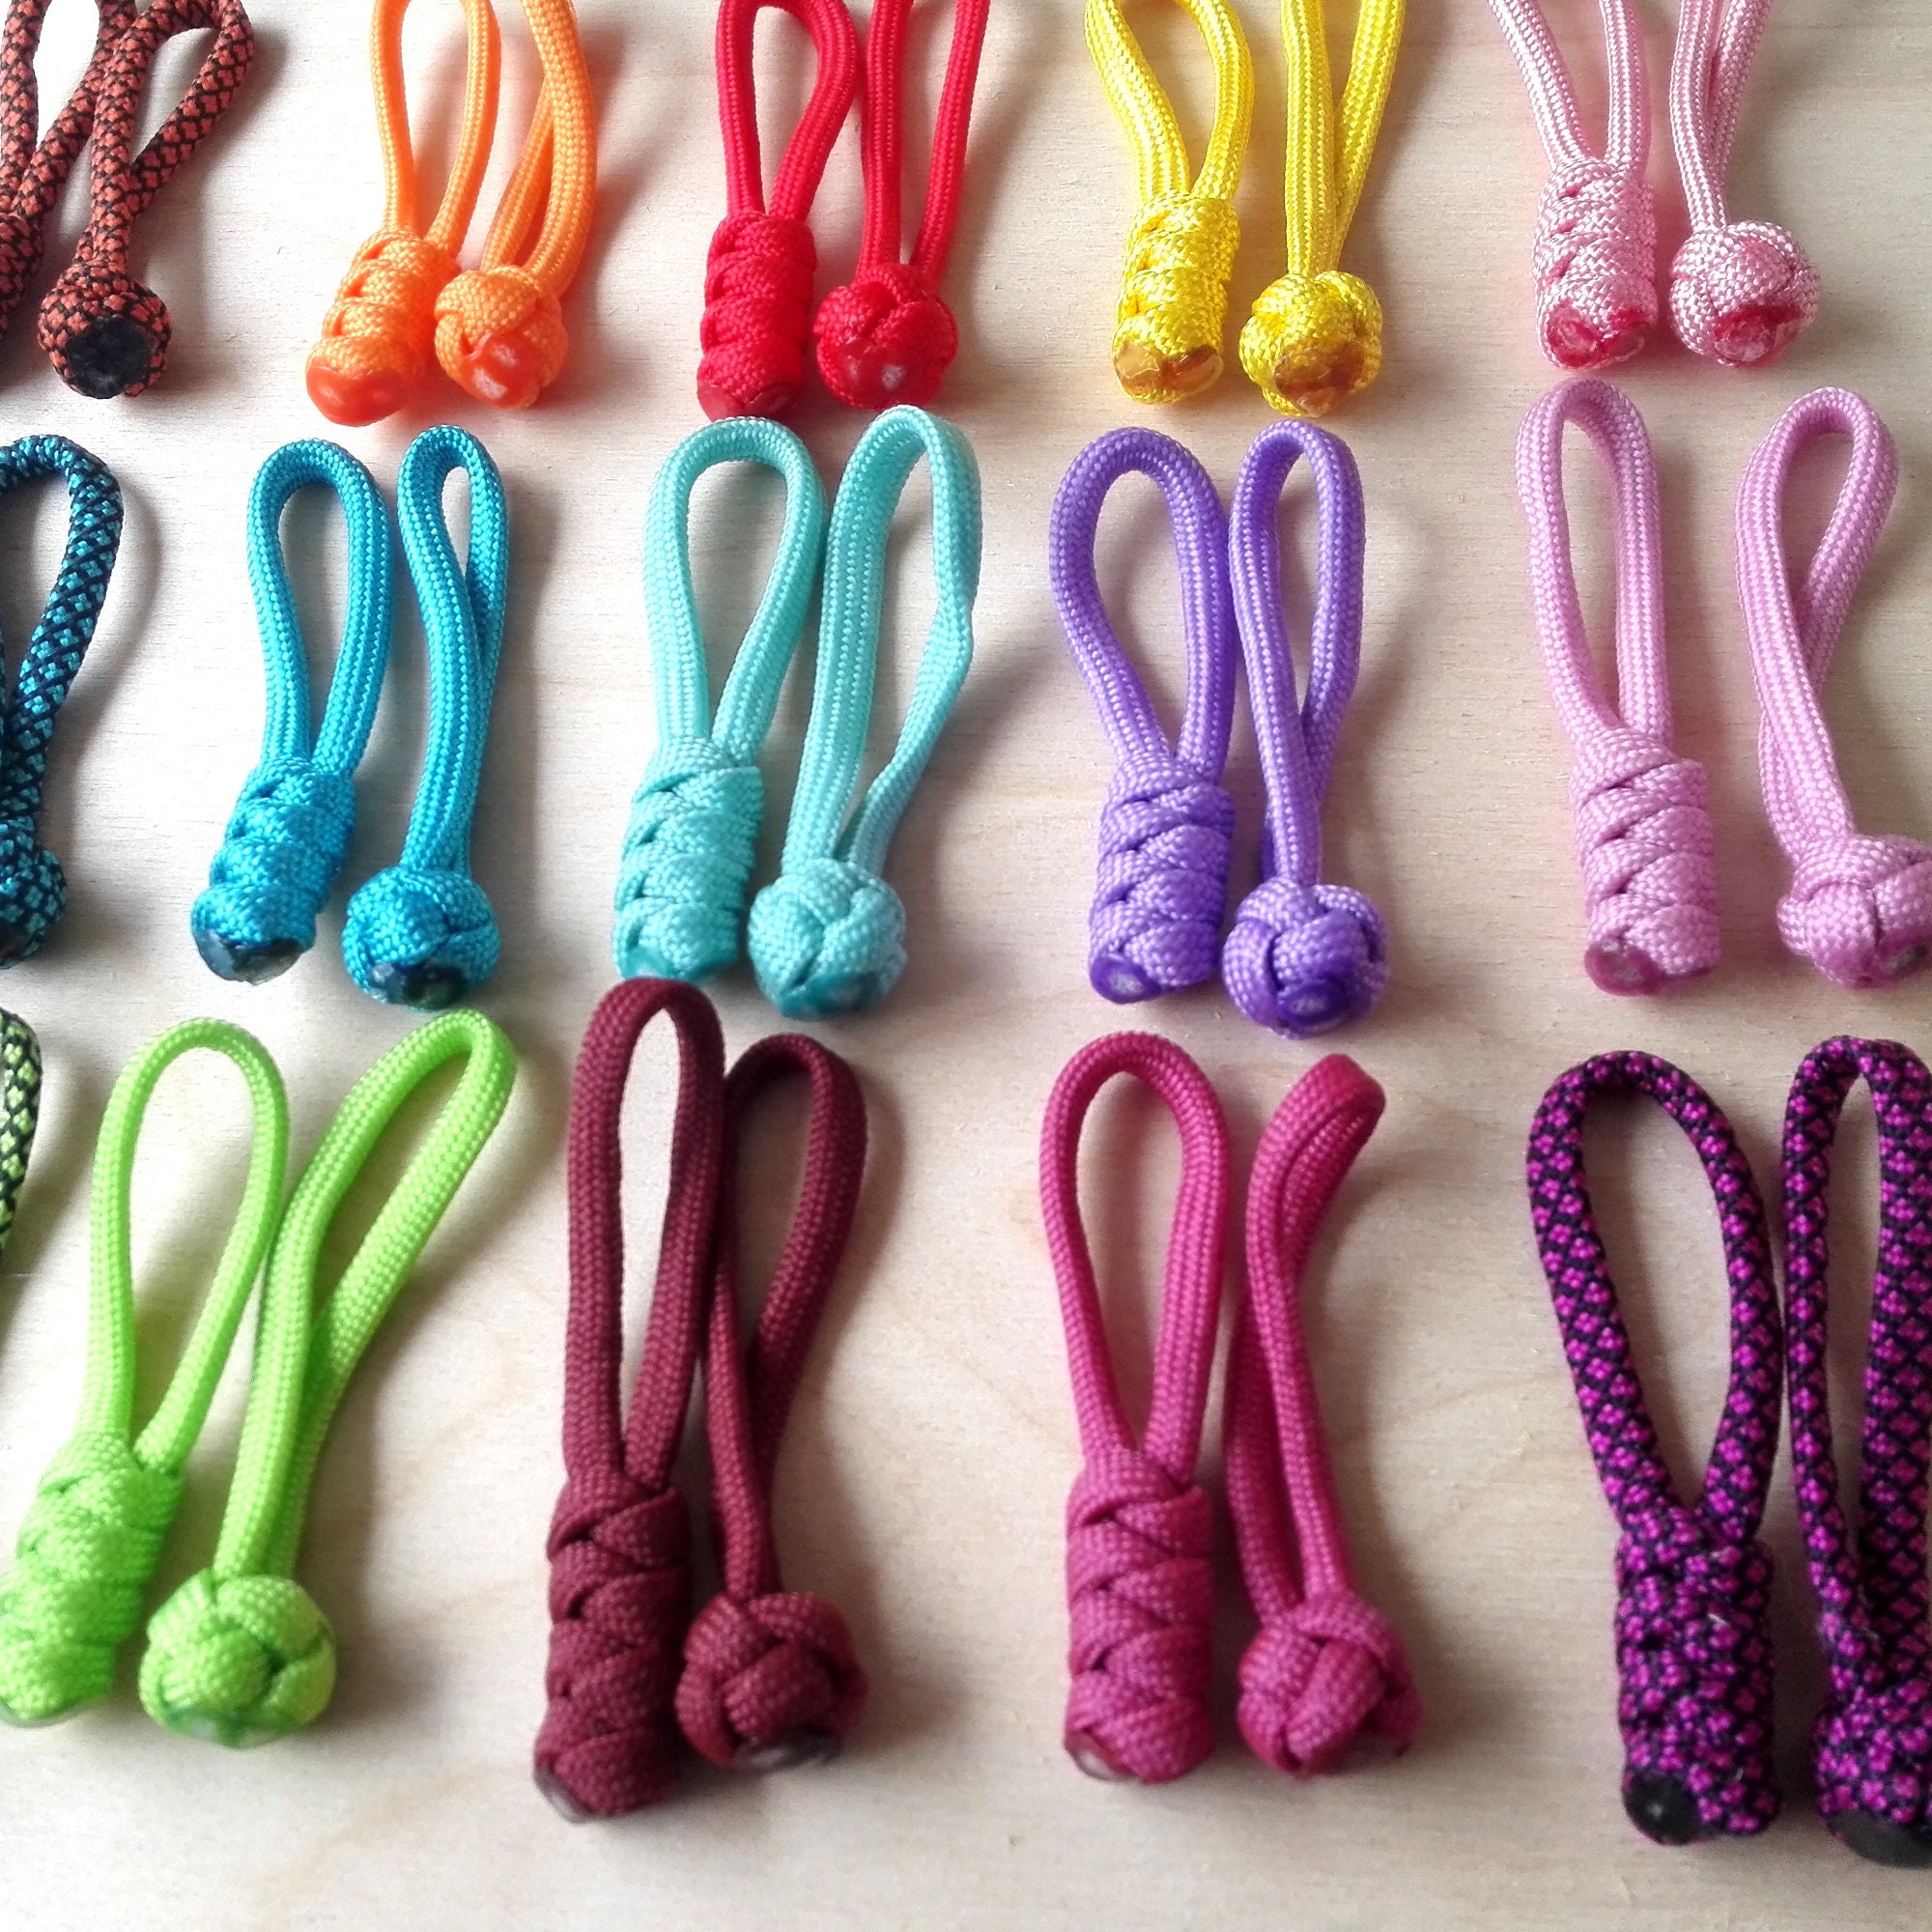  Bartact Paracord Zipper Pull Chameleon Set of 5 : Sports &  Outdoors